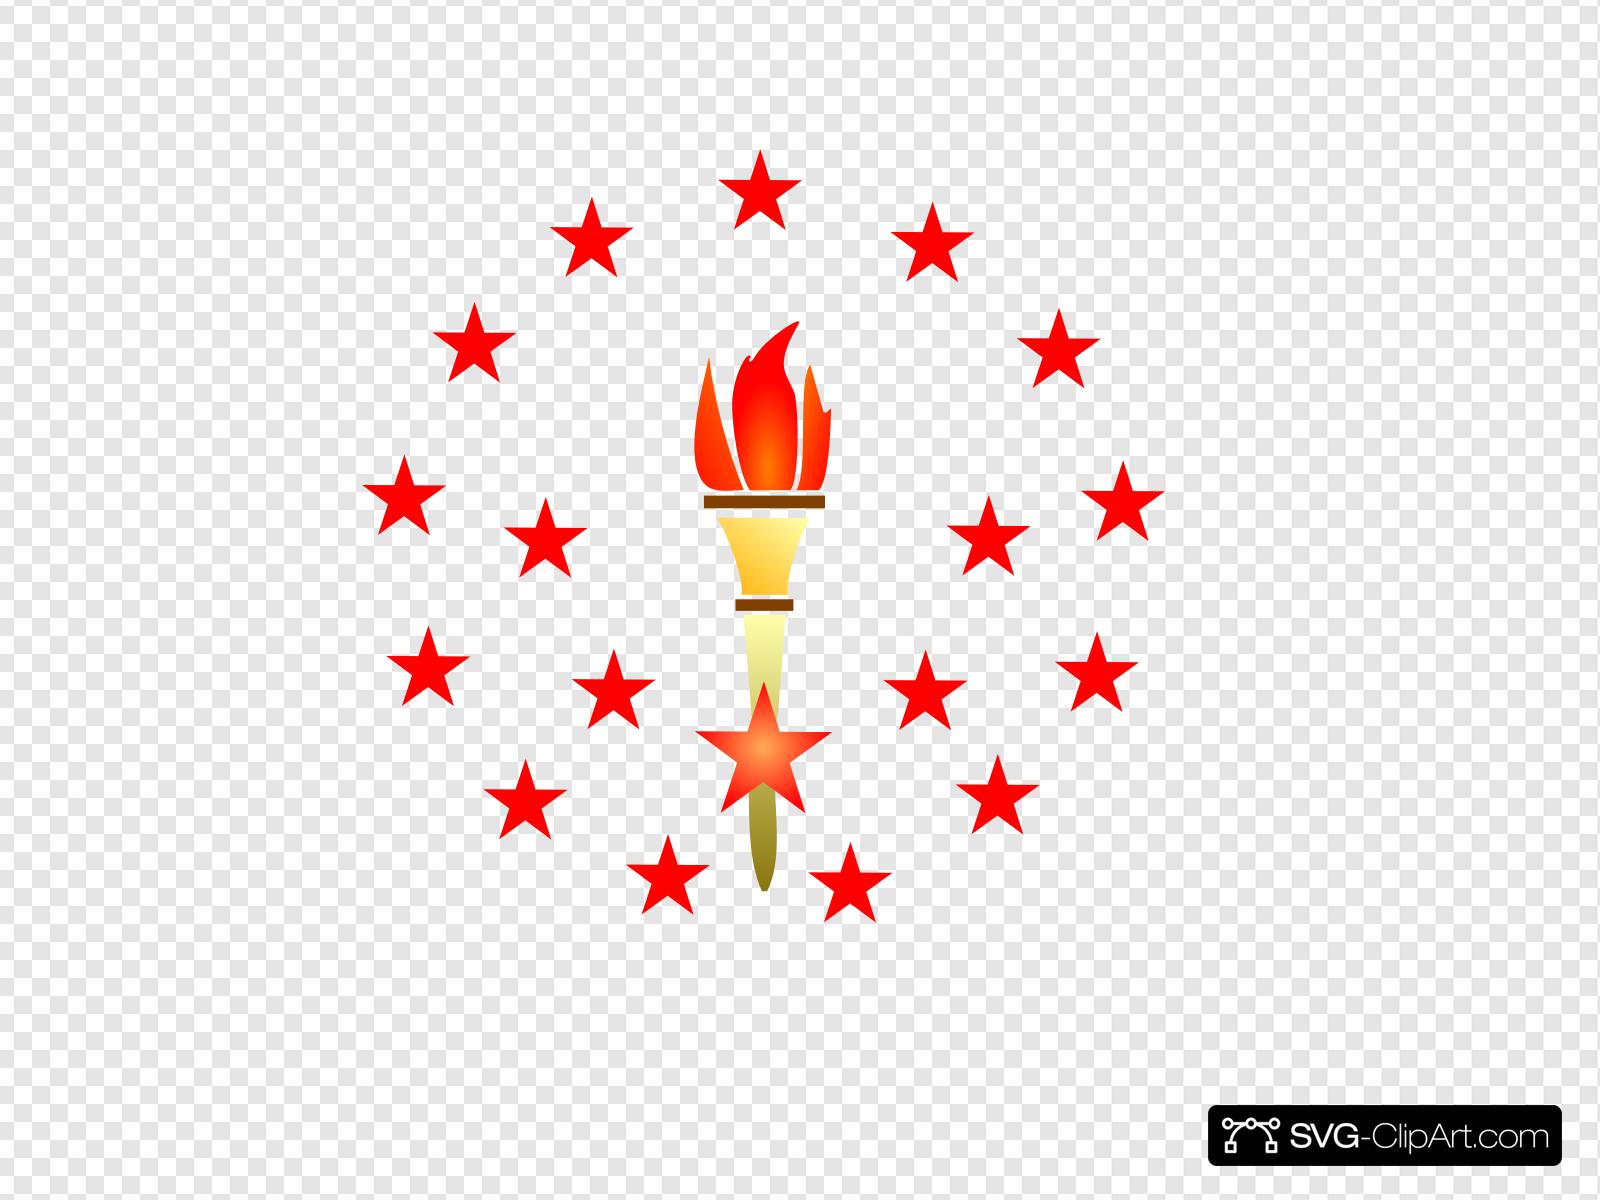 torch clipart red